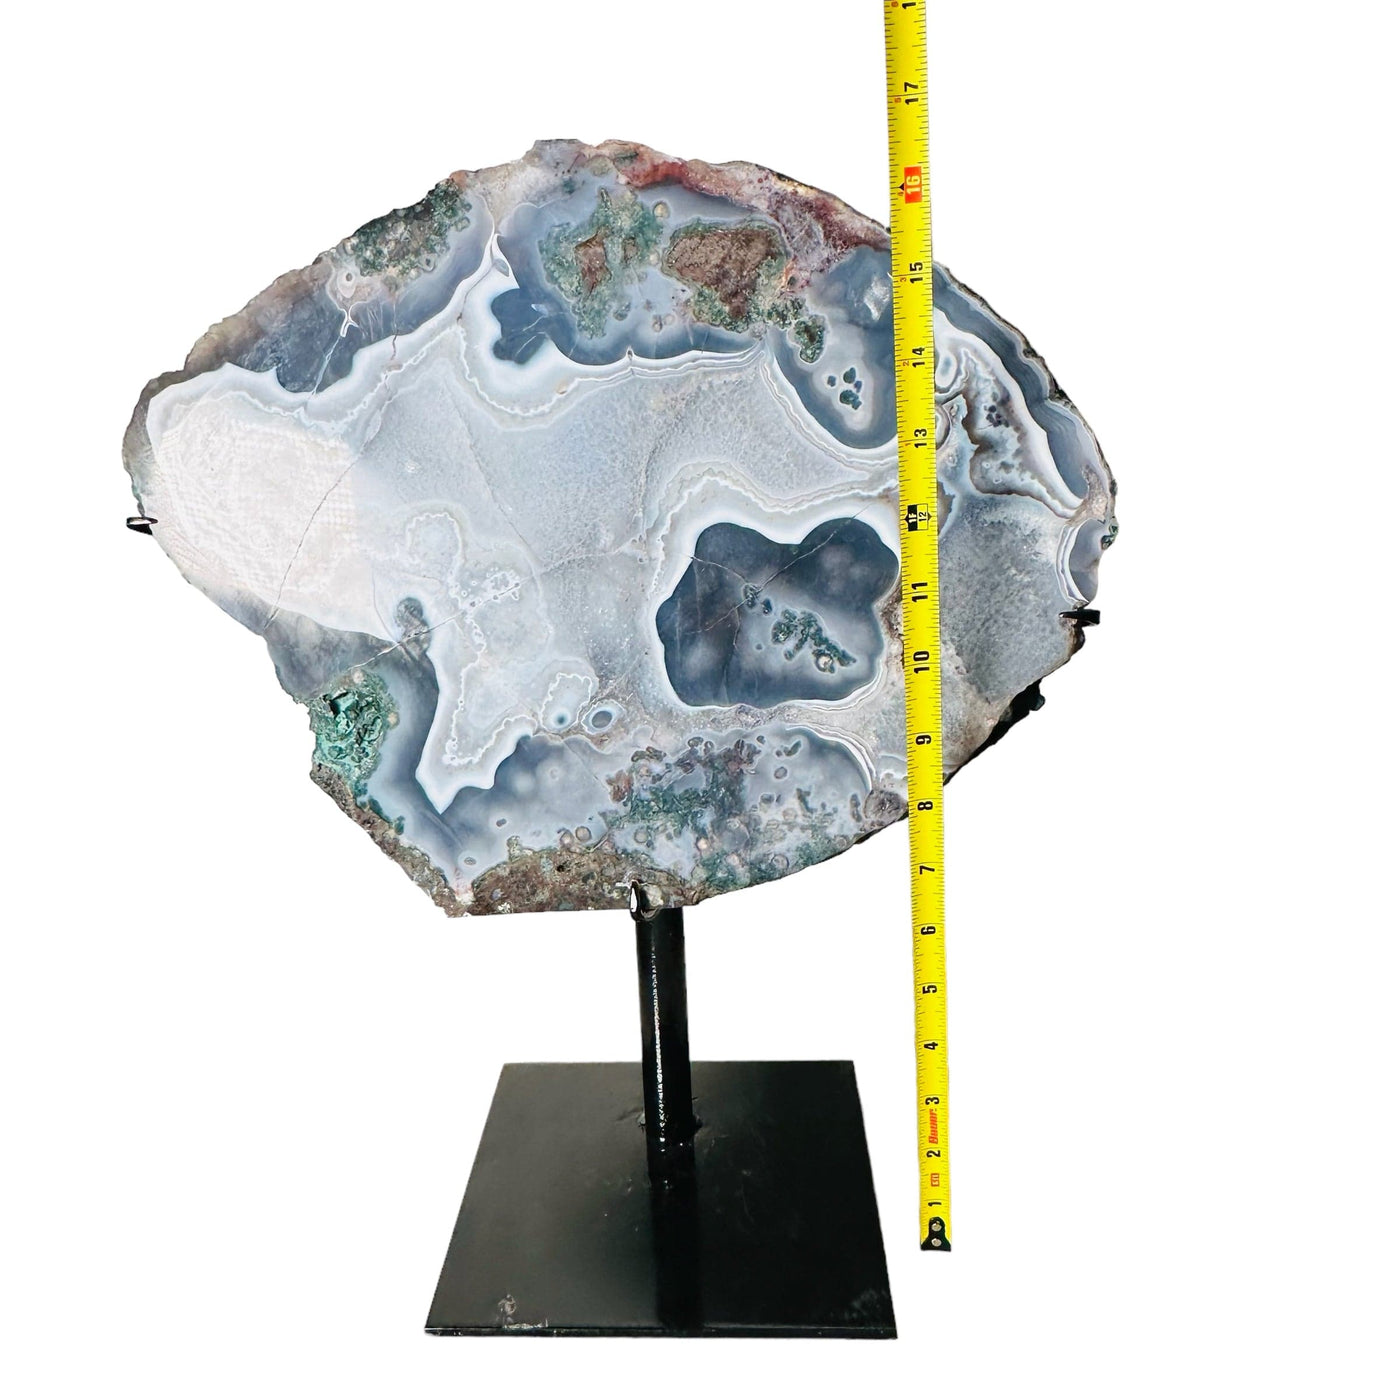 agate on stand next to a ruler for size reference 